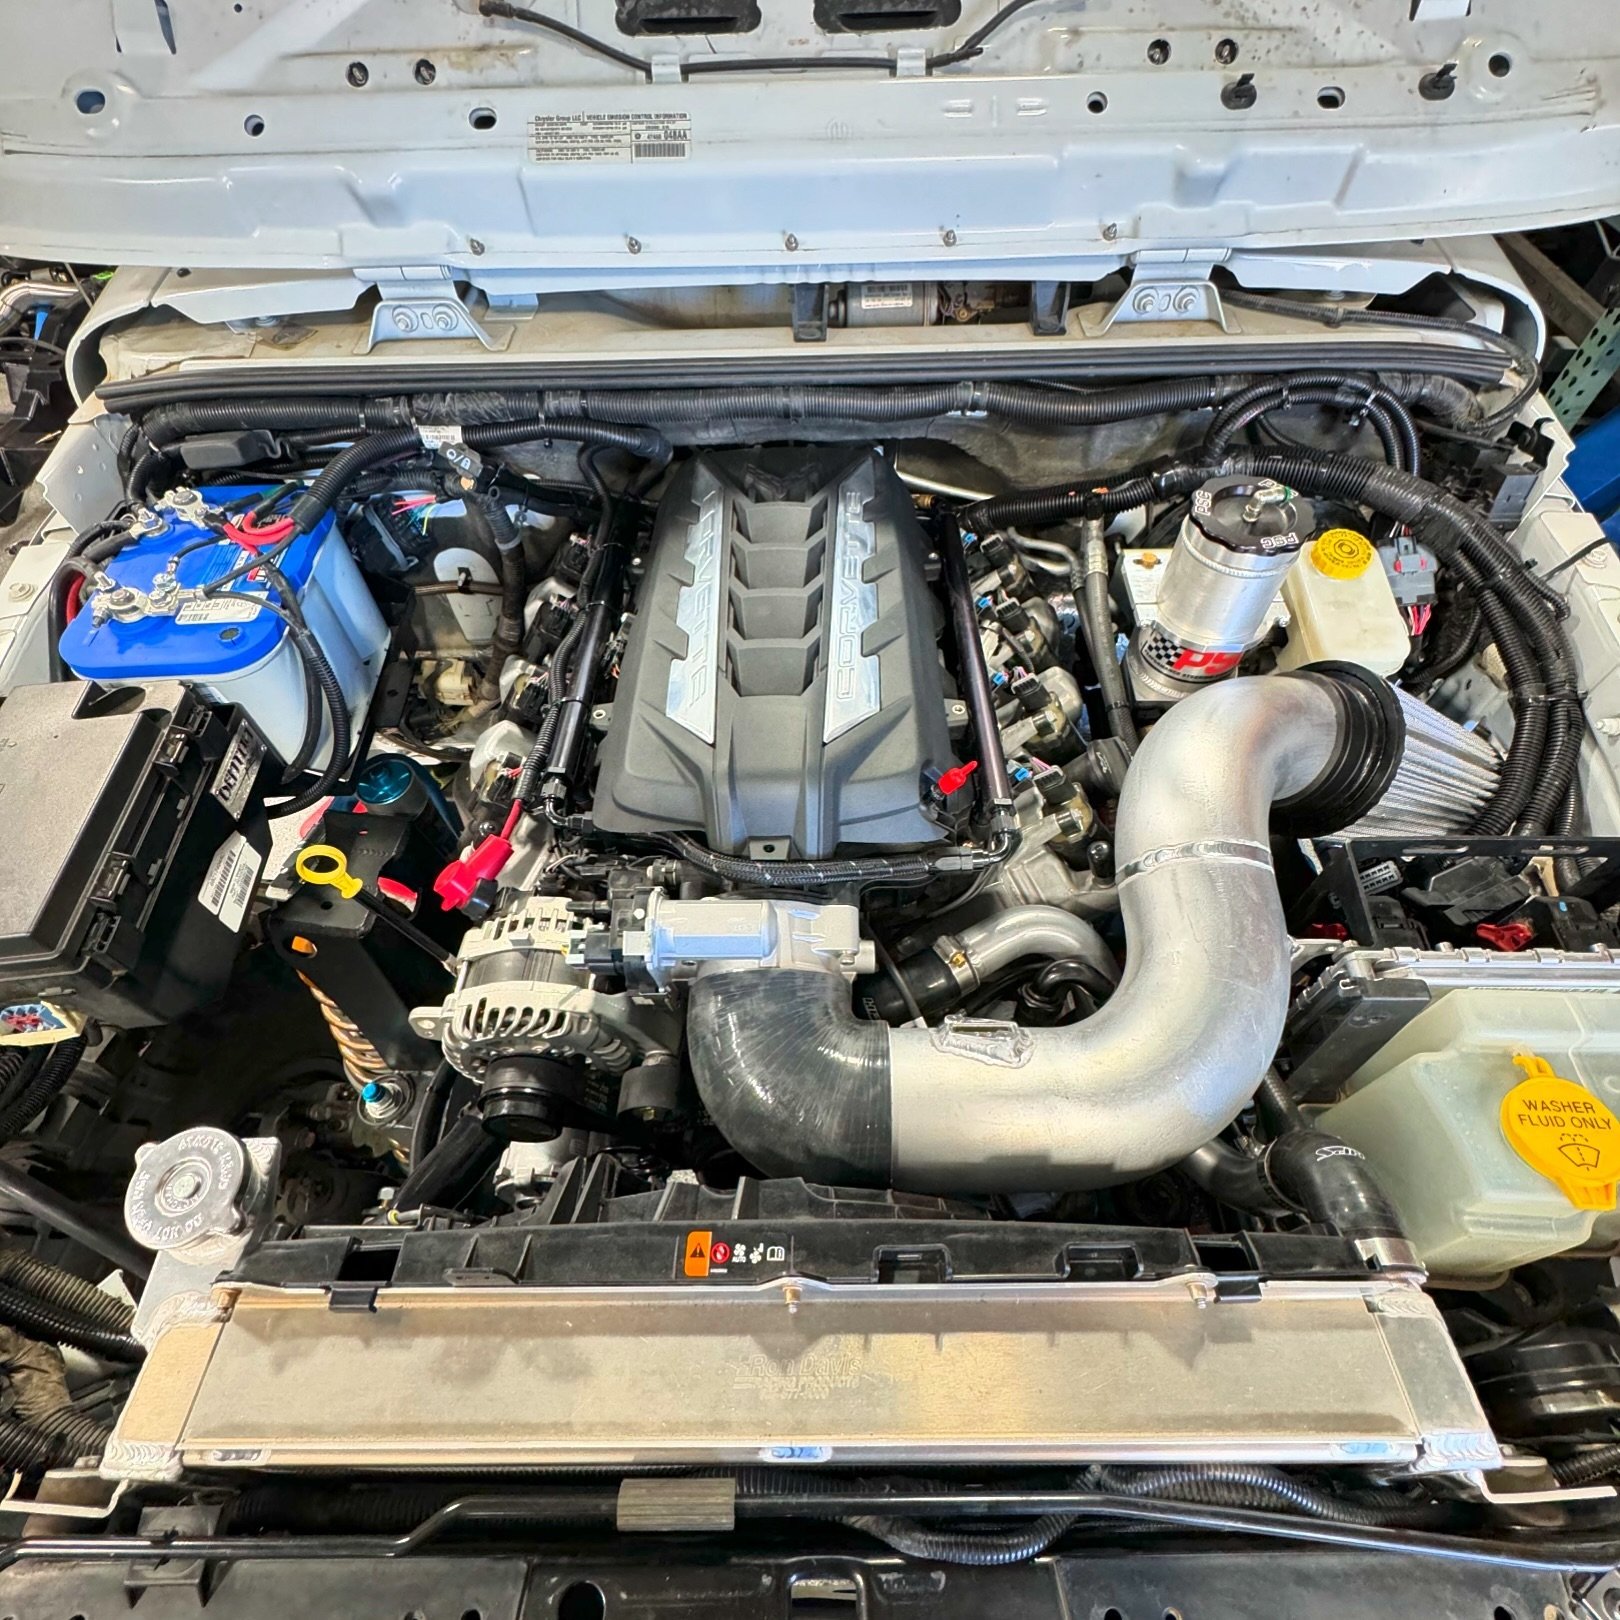 The @mastmotorsports L8T conversion is nearing completion for @sgtjeep.  This is an LT based 6.6liter engine making 600hp, backed by a 6l90e trans and an atlas transfercase.  The difference on this one is that engine has been converted to run on a st